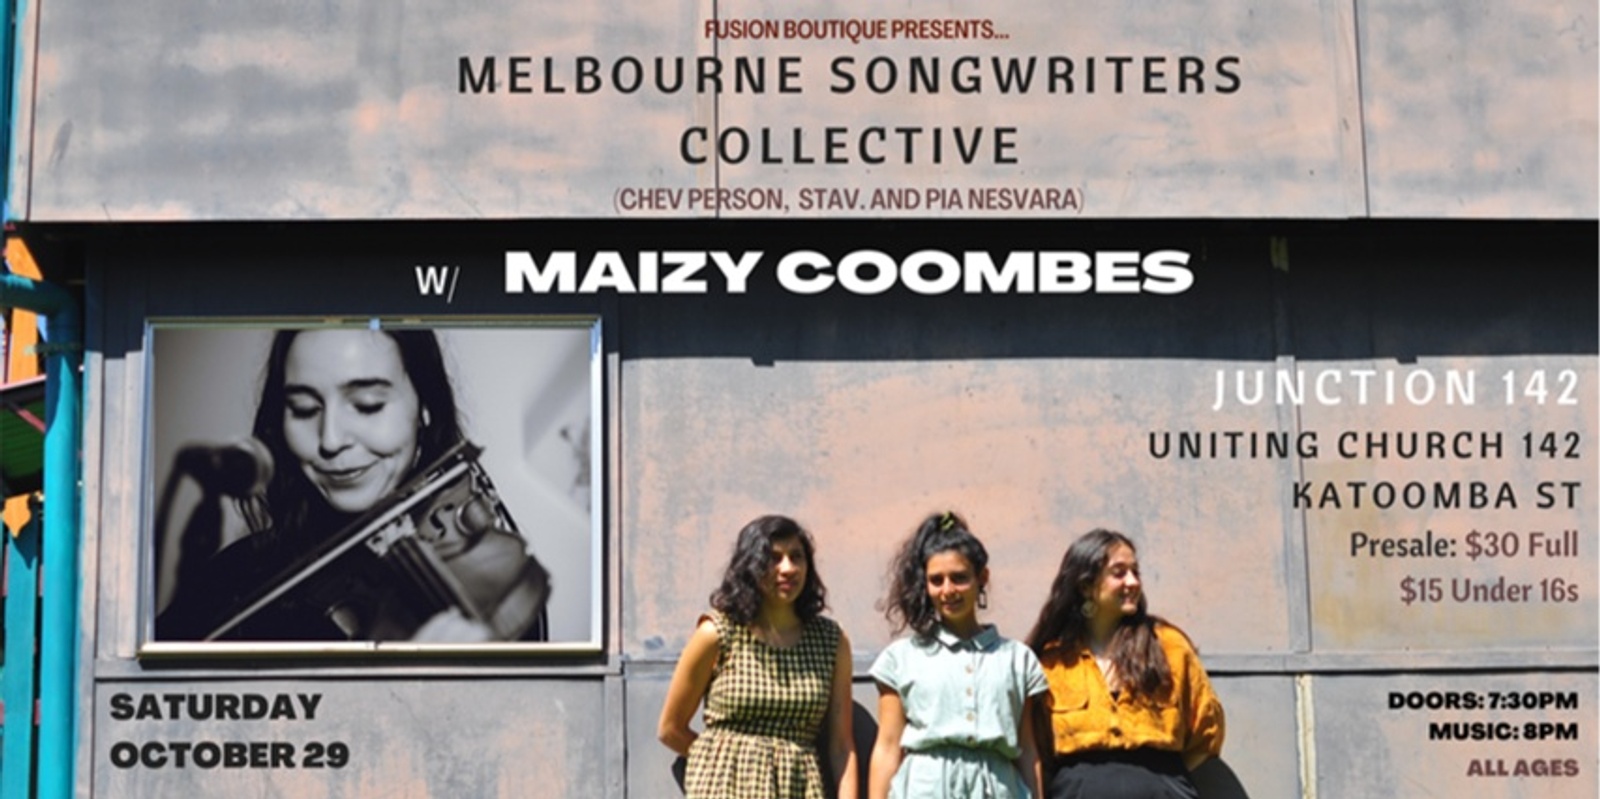 FUSION BOUTIQUE presents MELBOURNE SONGWRITERS COLLECTIVE + Special Guest MAIZY in Concert at Junction142, Katoomba, Blue Mountains